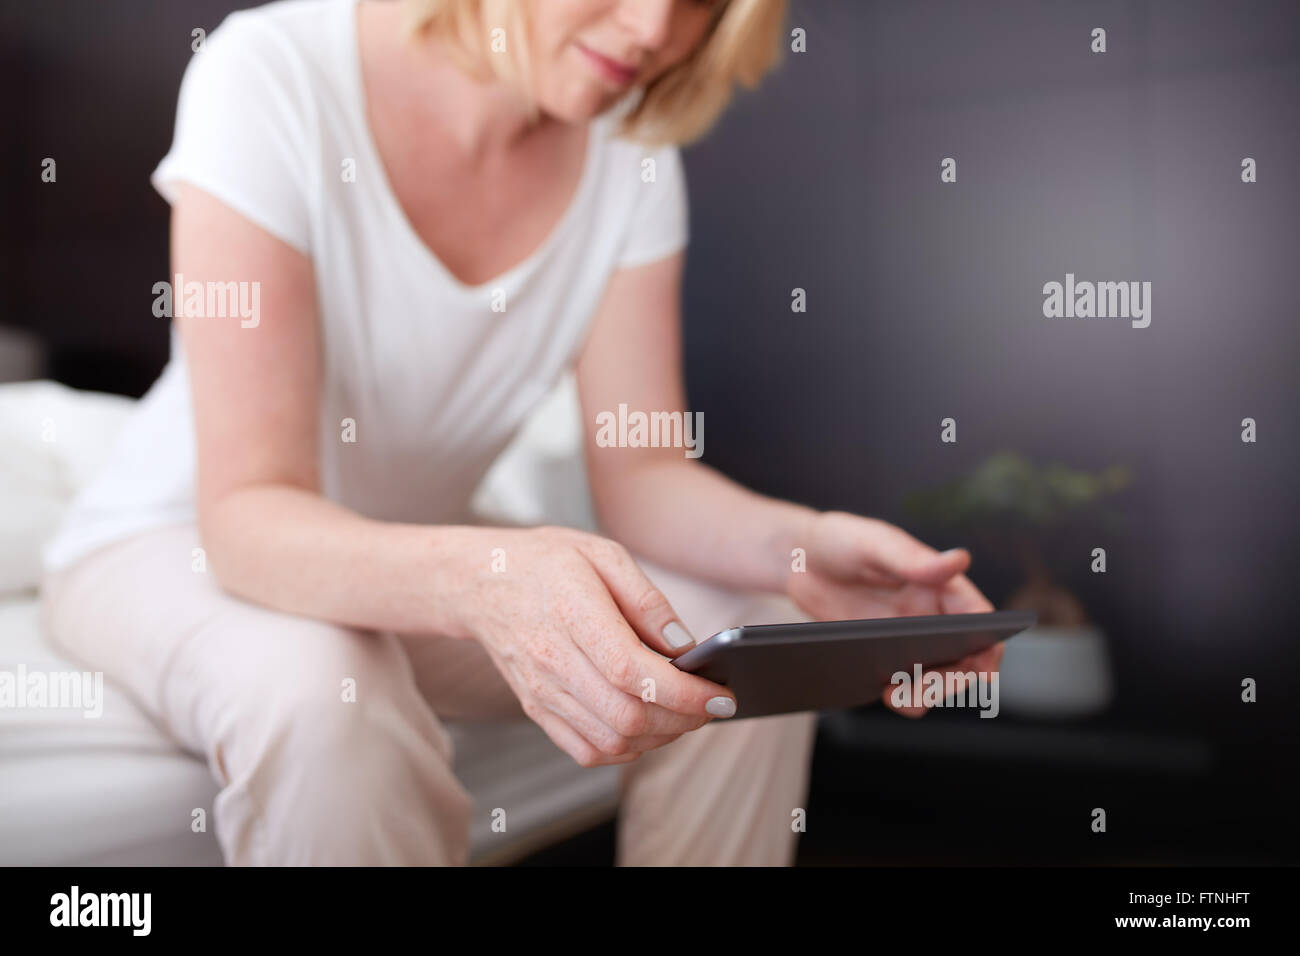 Cropped shot of a woman using digital tablet while sitting on the edge of bed. Focus on tablet  pc and woman hands. Stock Photo